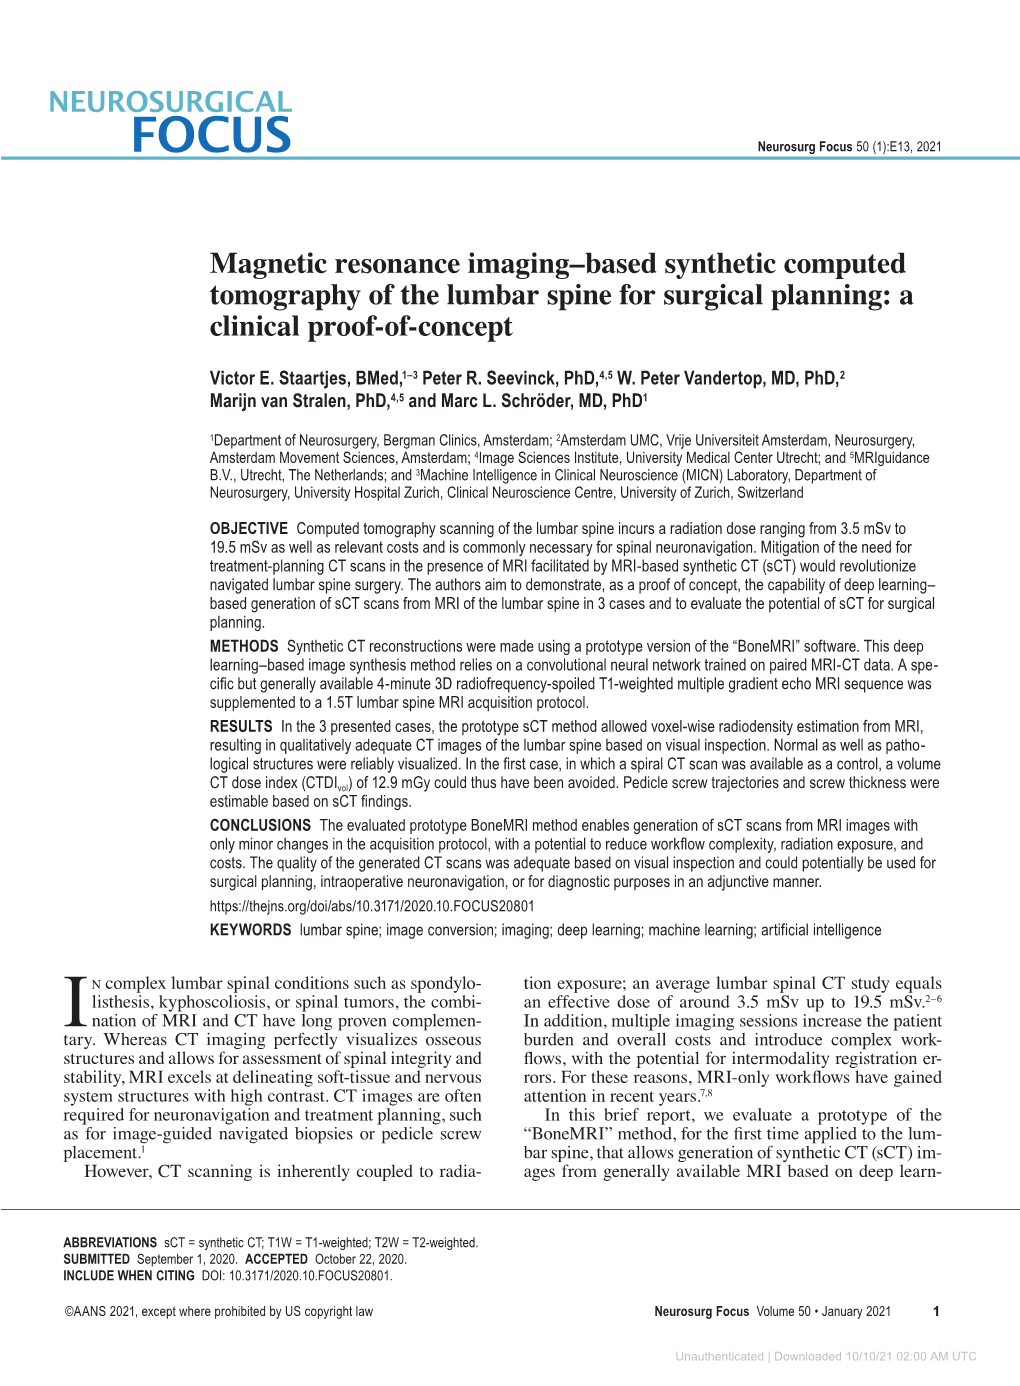 Magnetic Resonance Imaging–Based Synthetic Computed Tomography of the Lumbar Spine for Surgical Planning: a Clinical Proof-Of-Concept